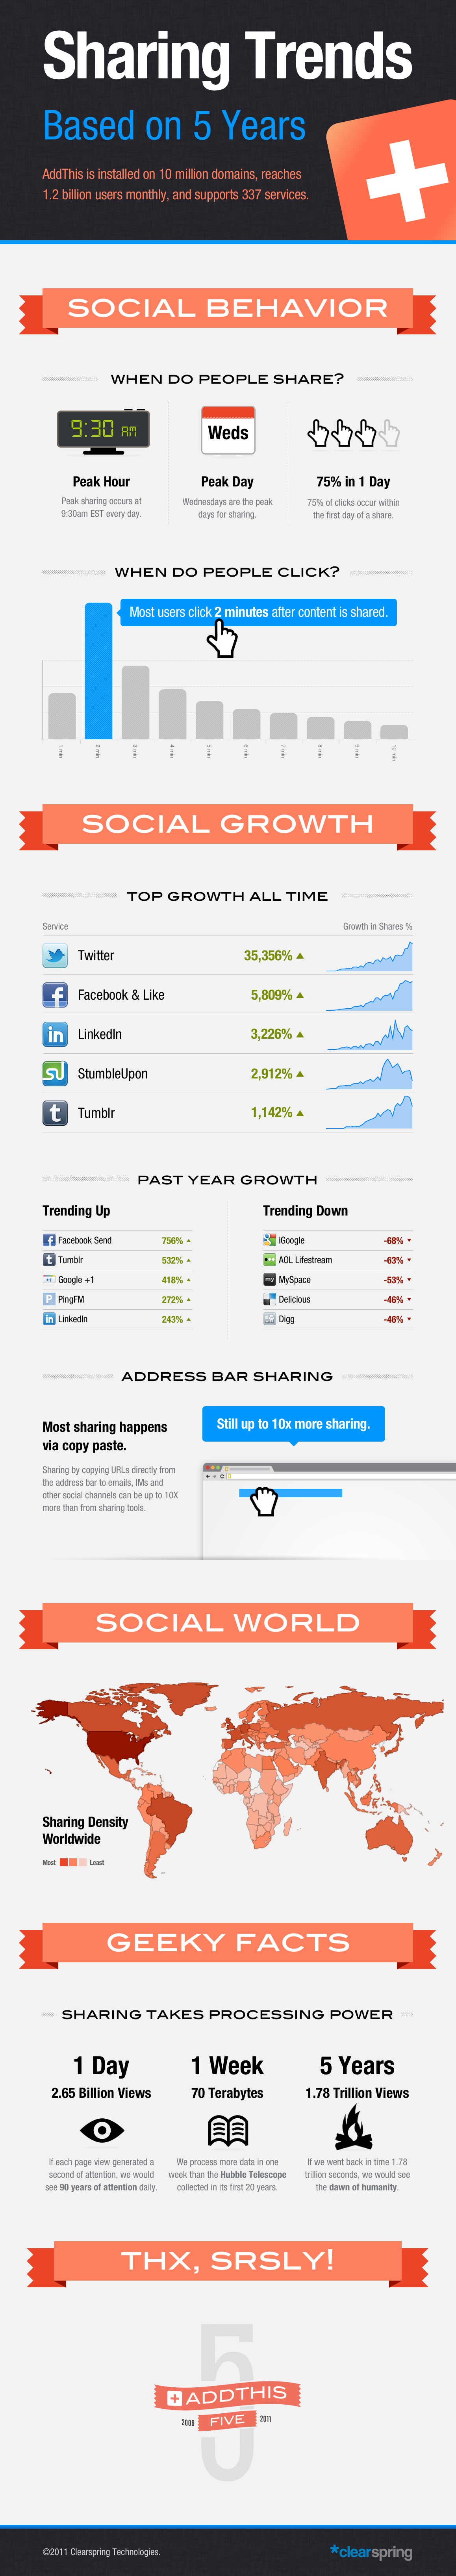 sharing infographic gnd 5 ans de partage social